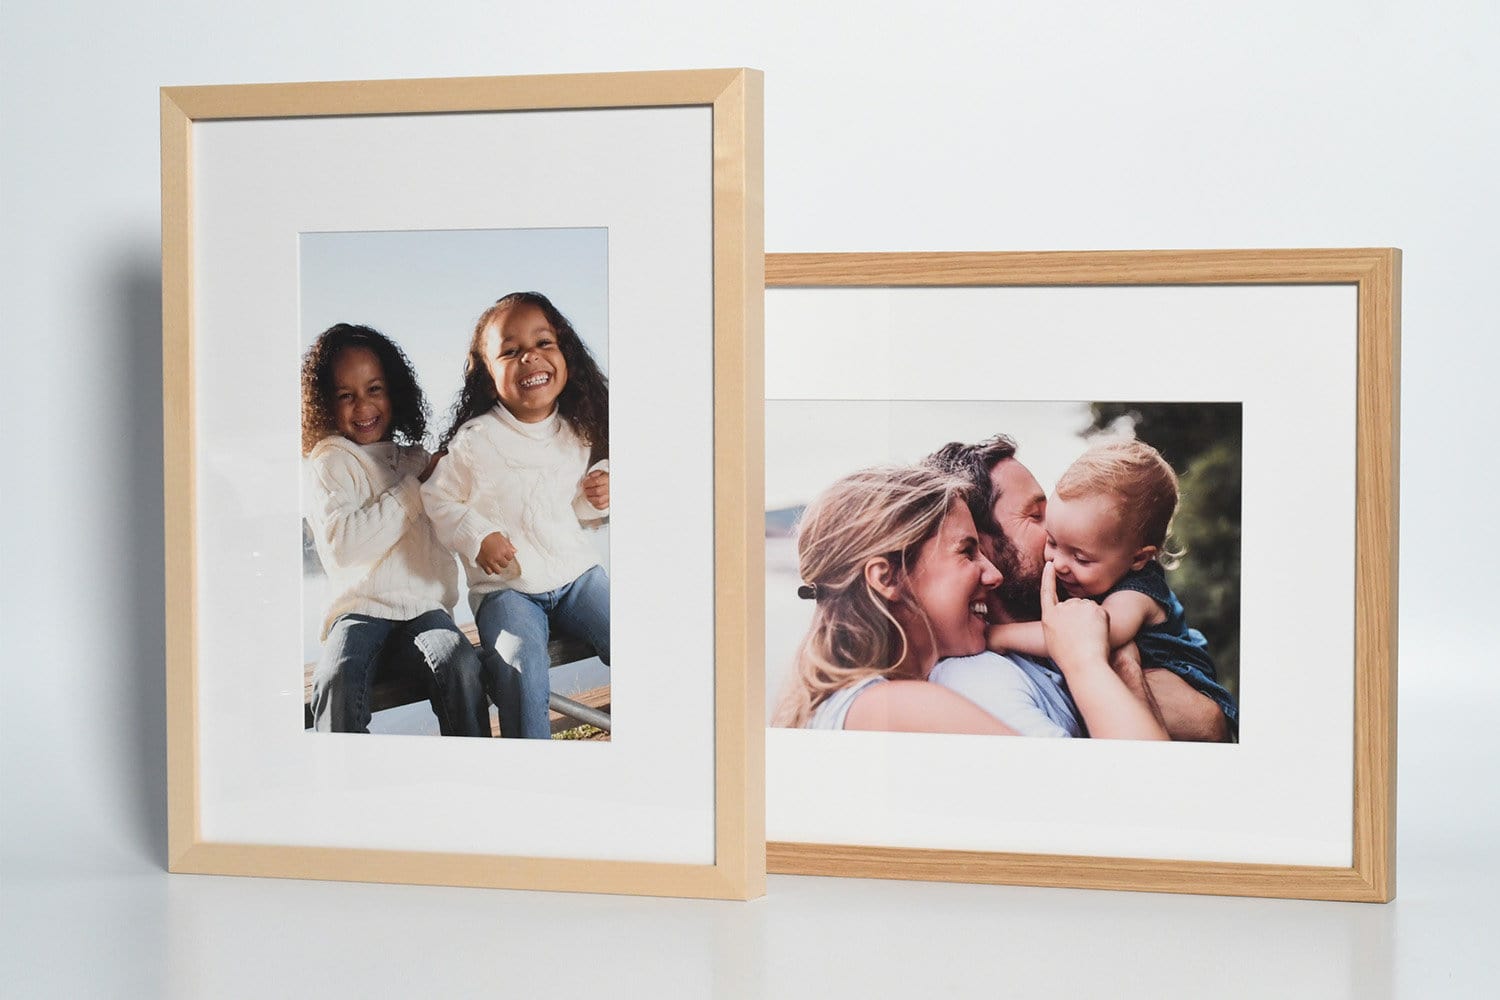 Natural Wood Framed Photo Prints in Clear Maple and White Oak